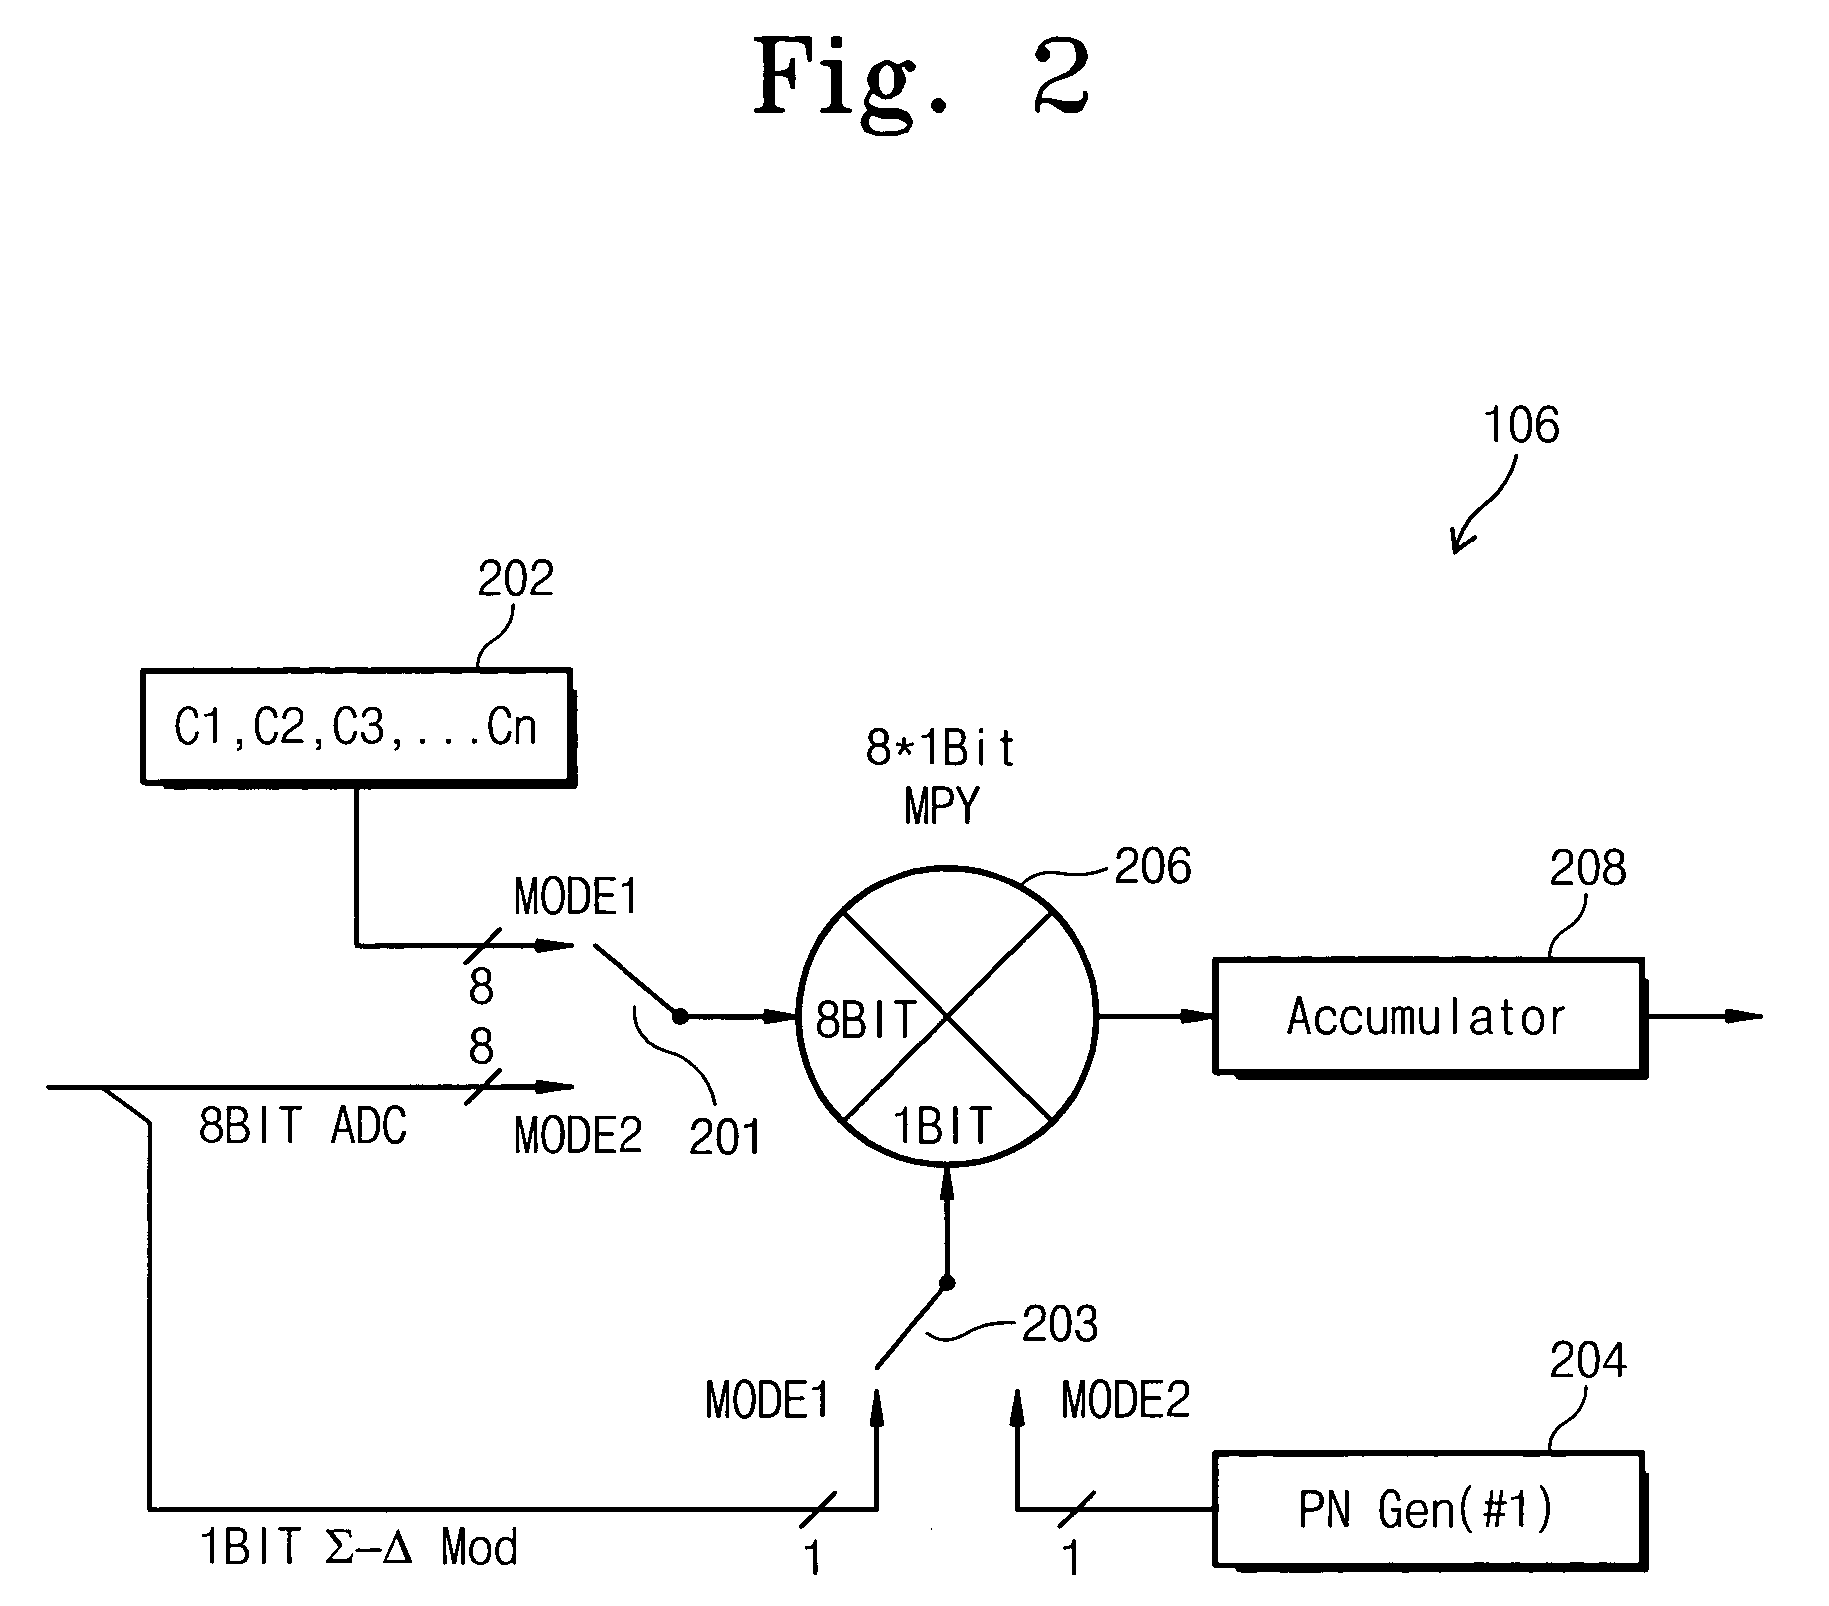 Multi-mode communication device operable in GSM/WCDMA